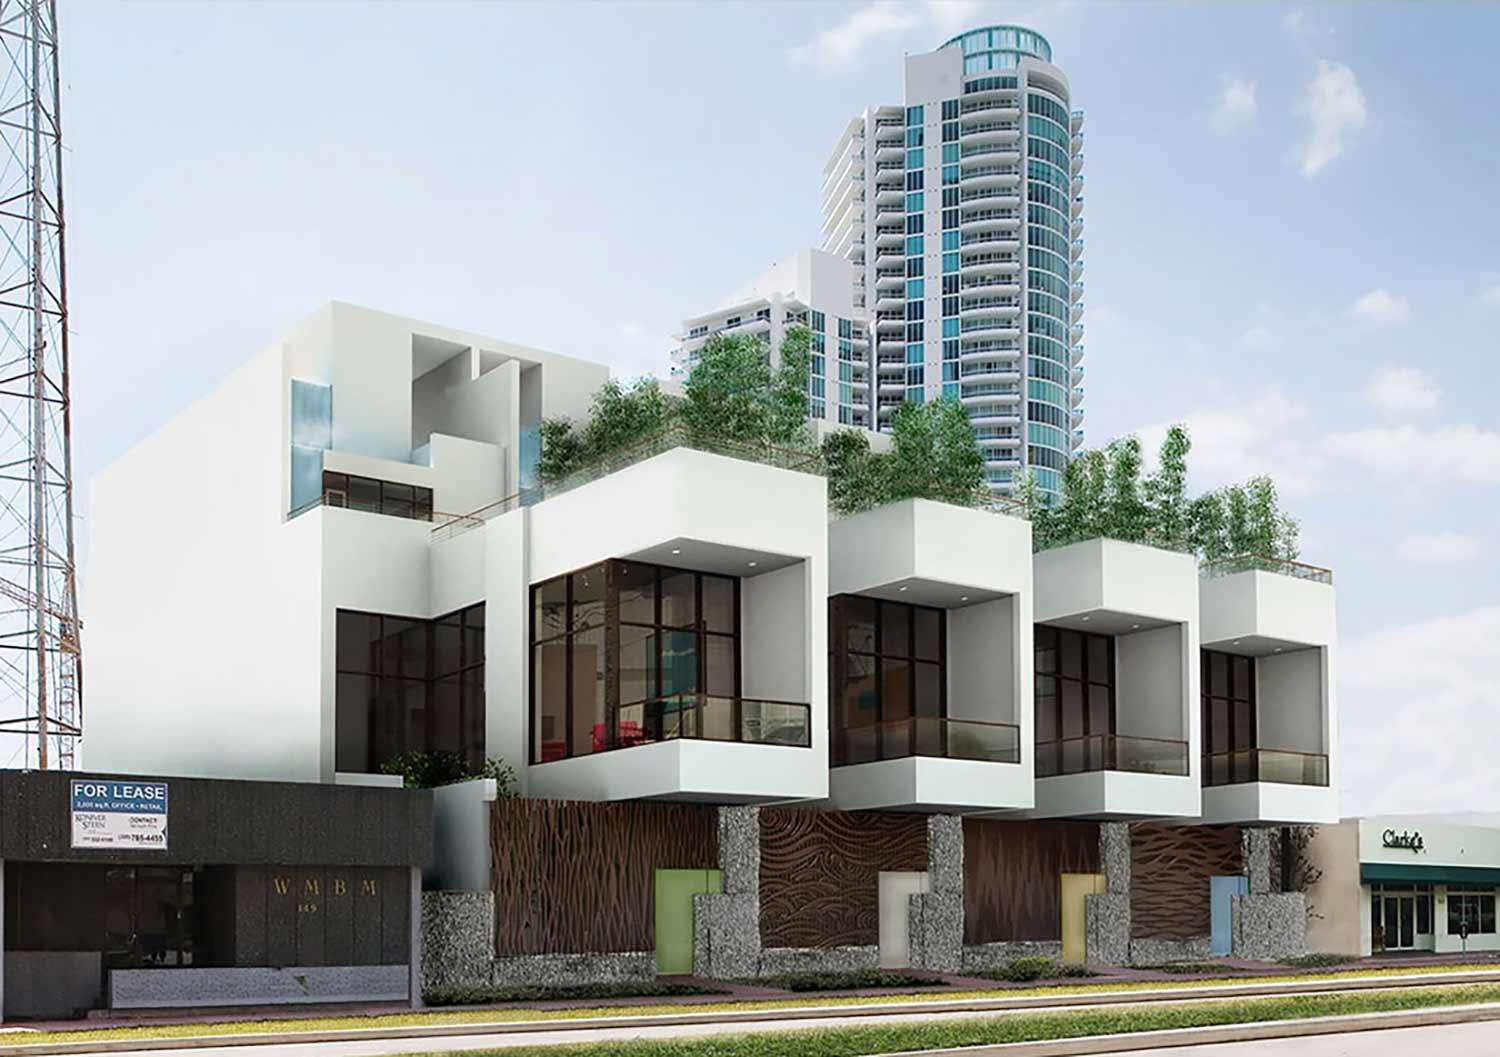 The project consists of four townhouses located on a broad landscaped boulevard in South Beach. The individual townhouses are composed of a series of horizontal, overlapping “drawers,” both enclosed and unenclosed, that create living areas of varying heights. These horizontal volumes are pinned together by a solid vertical element, the elevator, that sits near the center of each of the compositions. The landscaped ground level establishes the first of a series of horizontal planes that cap the shifting horizontal volumes. These are surfaced alternately in stone, natural ground cover, and wood decks, all with water features and variable amounts of vegetation.

The townhouses are differentiated by decorative attributes that identify each unit with one of the four elements: water, earth, fire, and air. These elements inform the individual designs of the cast metal fences, doors, and entry courts. Off-center pivoting main doors into the entry courts are built of smooth and rough-hewn stone, and translucent cast resin panels on a cast metal framework.